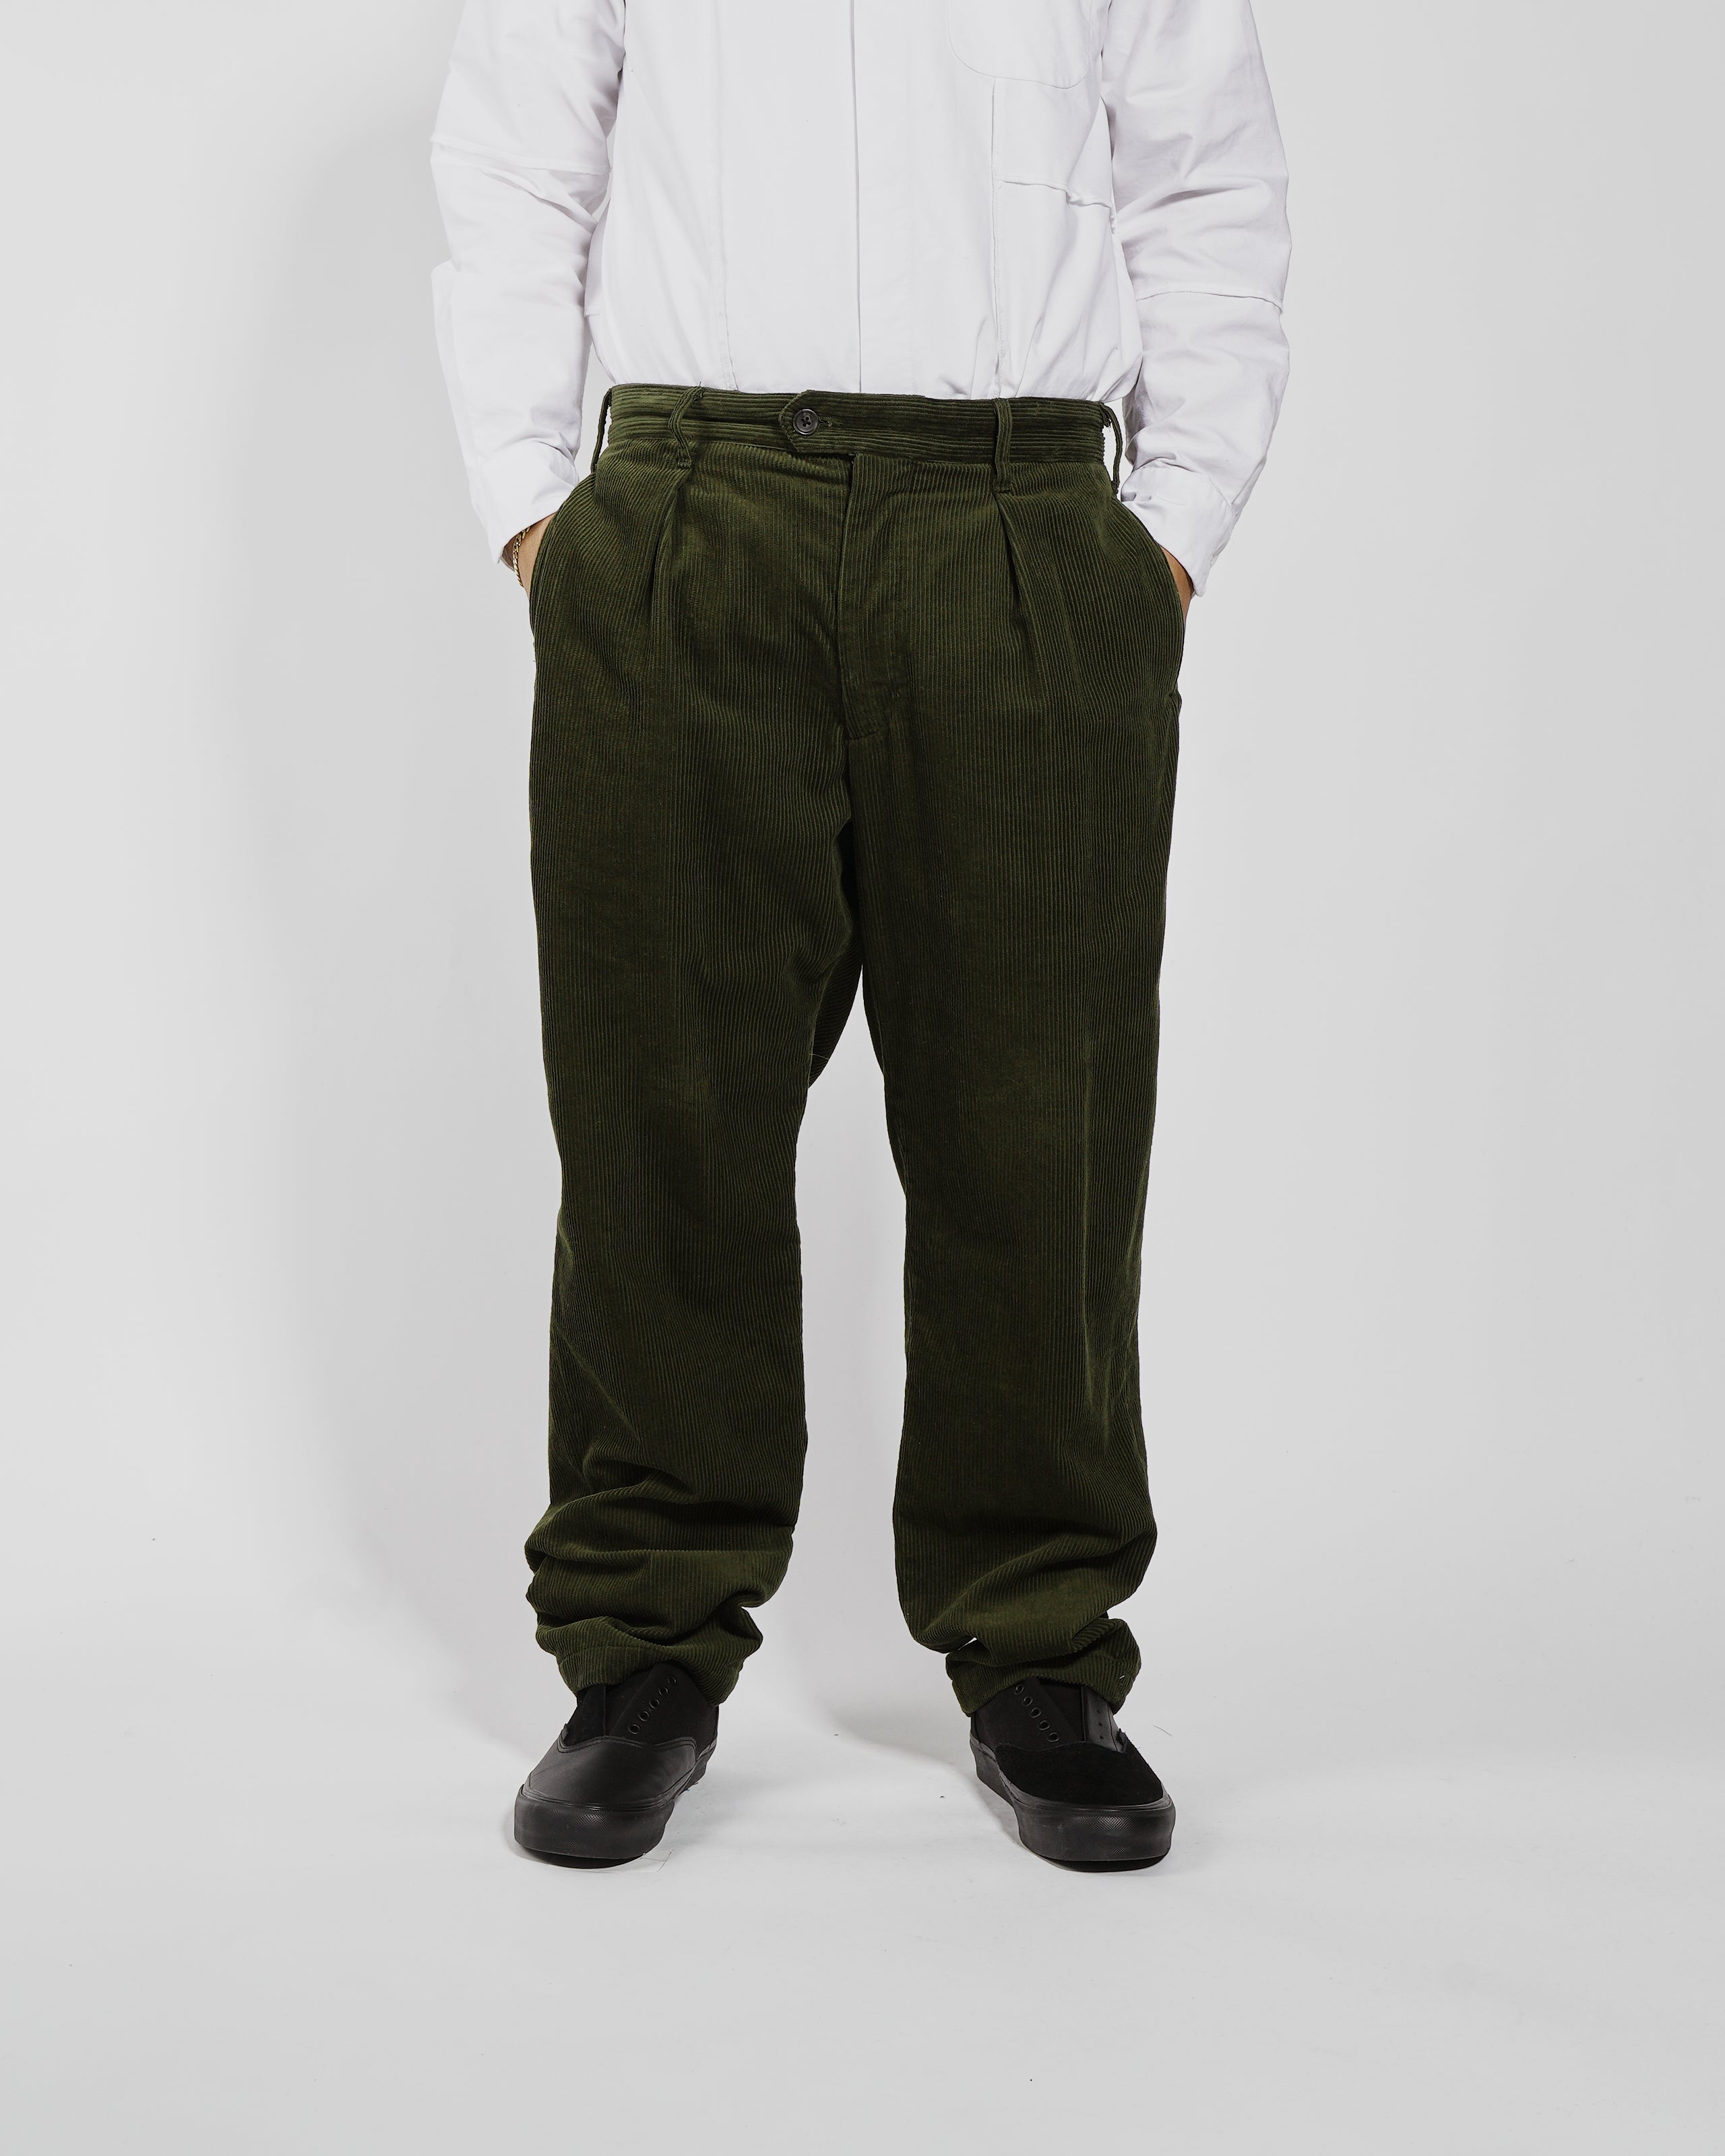 Carlyle Pant - Olive Cotton 8W Corduroy